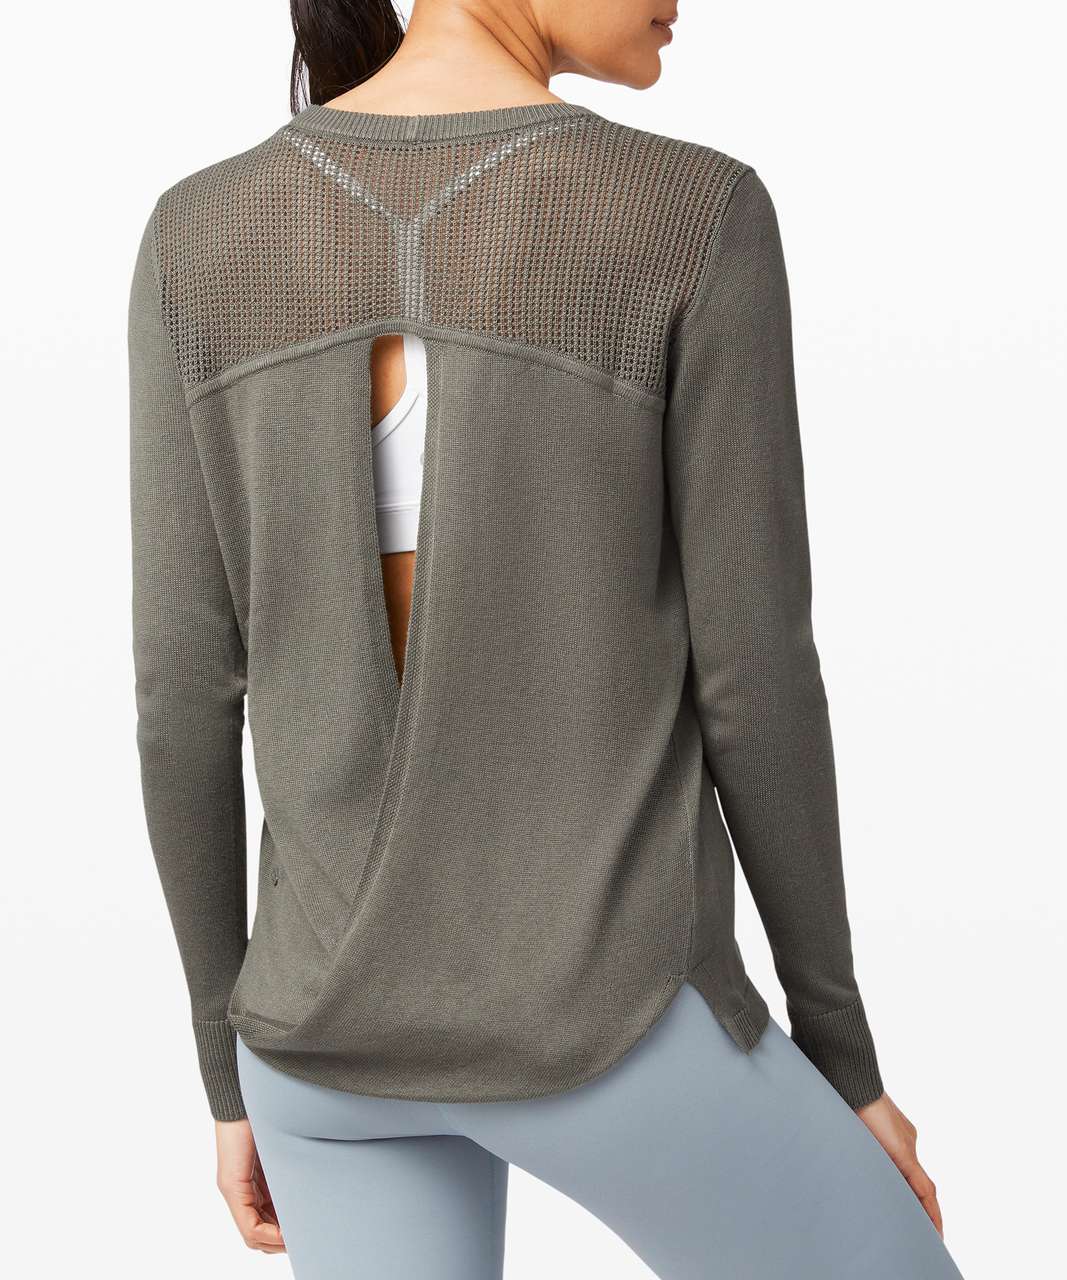 Lululemon Sweater Womens Small Knit Shirt V Neck Long Sleeve Gray Perforated